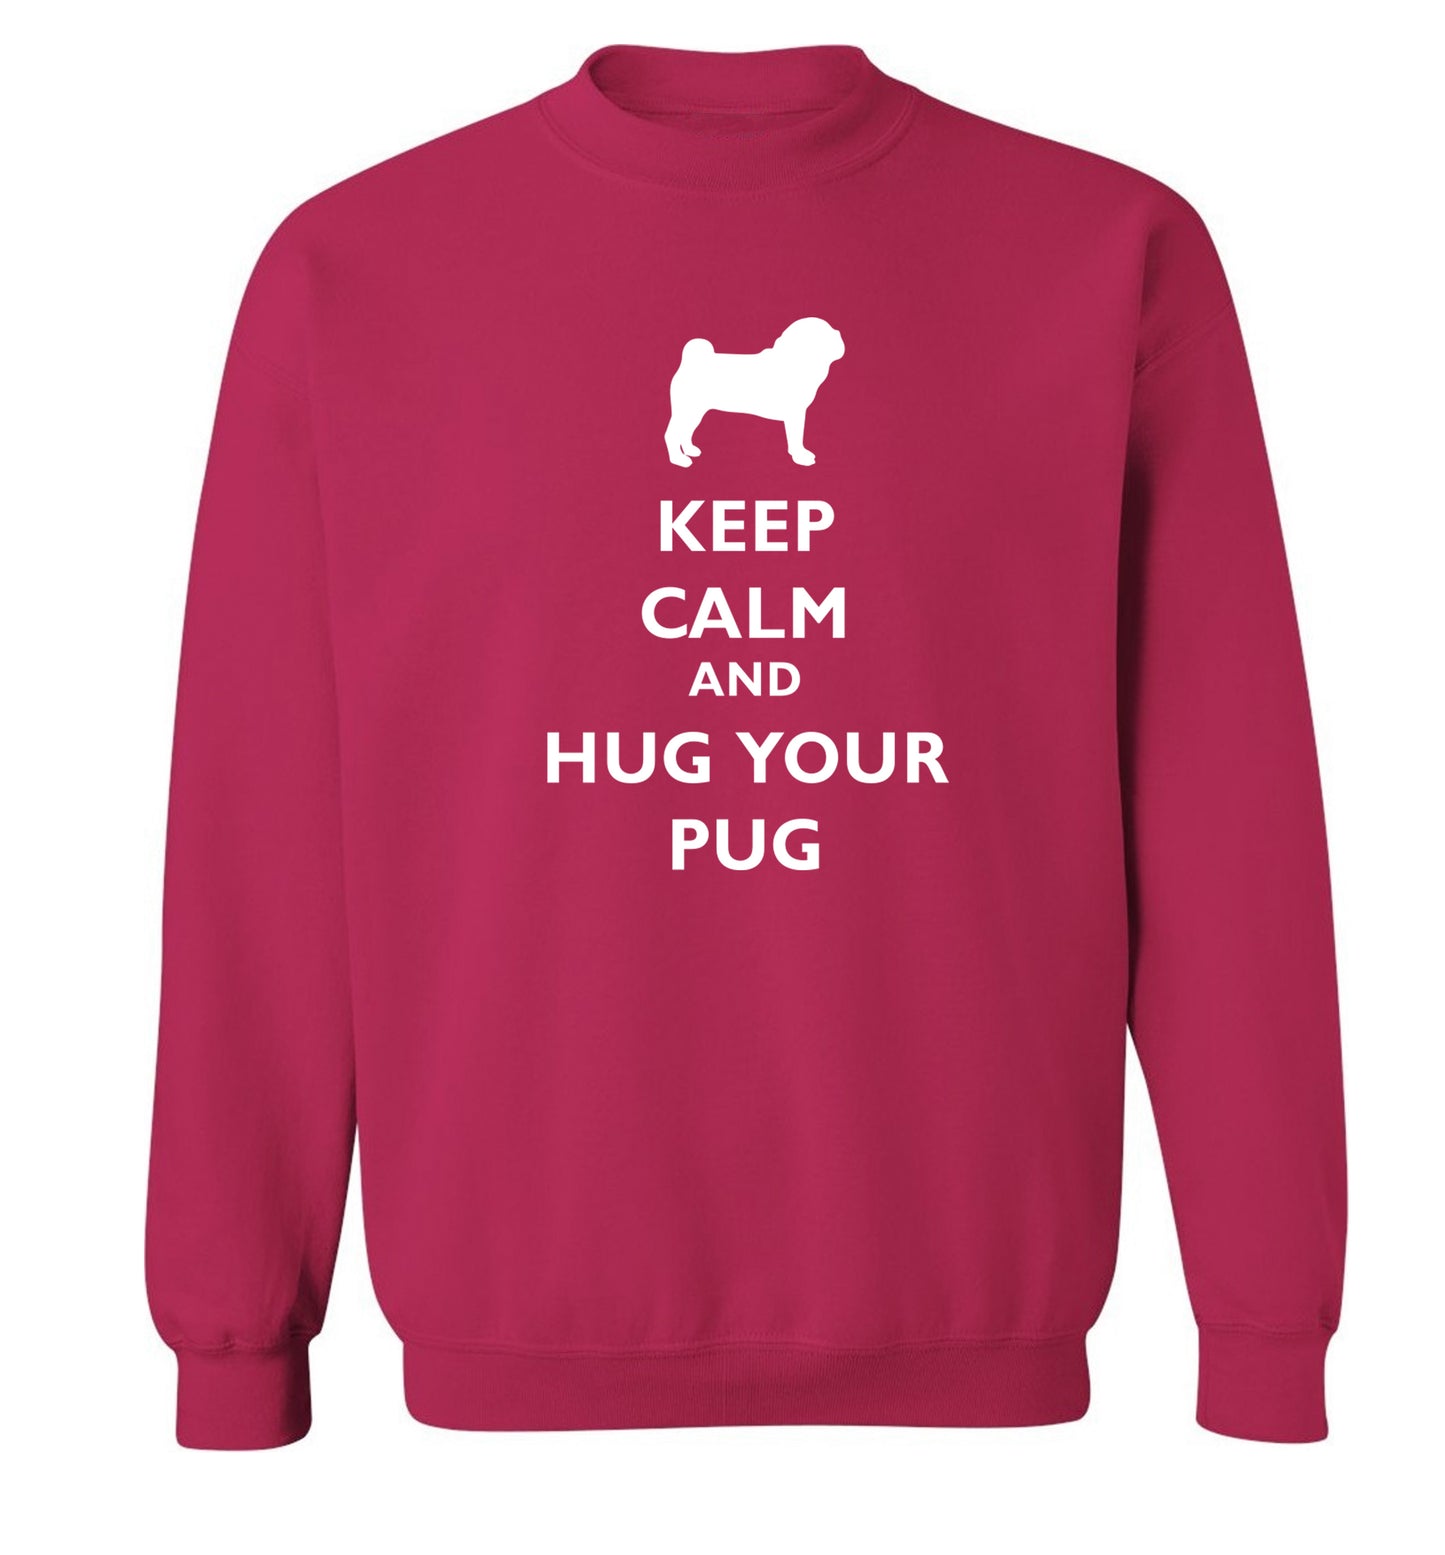 Keep calm and hug your pug Adult's unisex pink Sweater 2XL